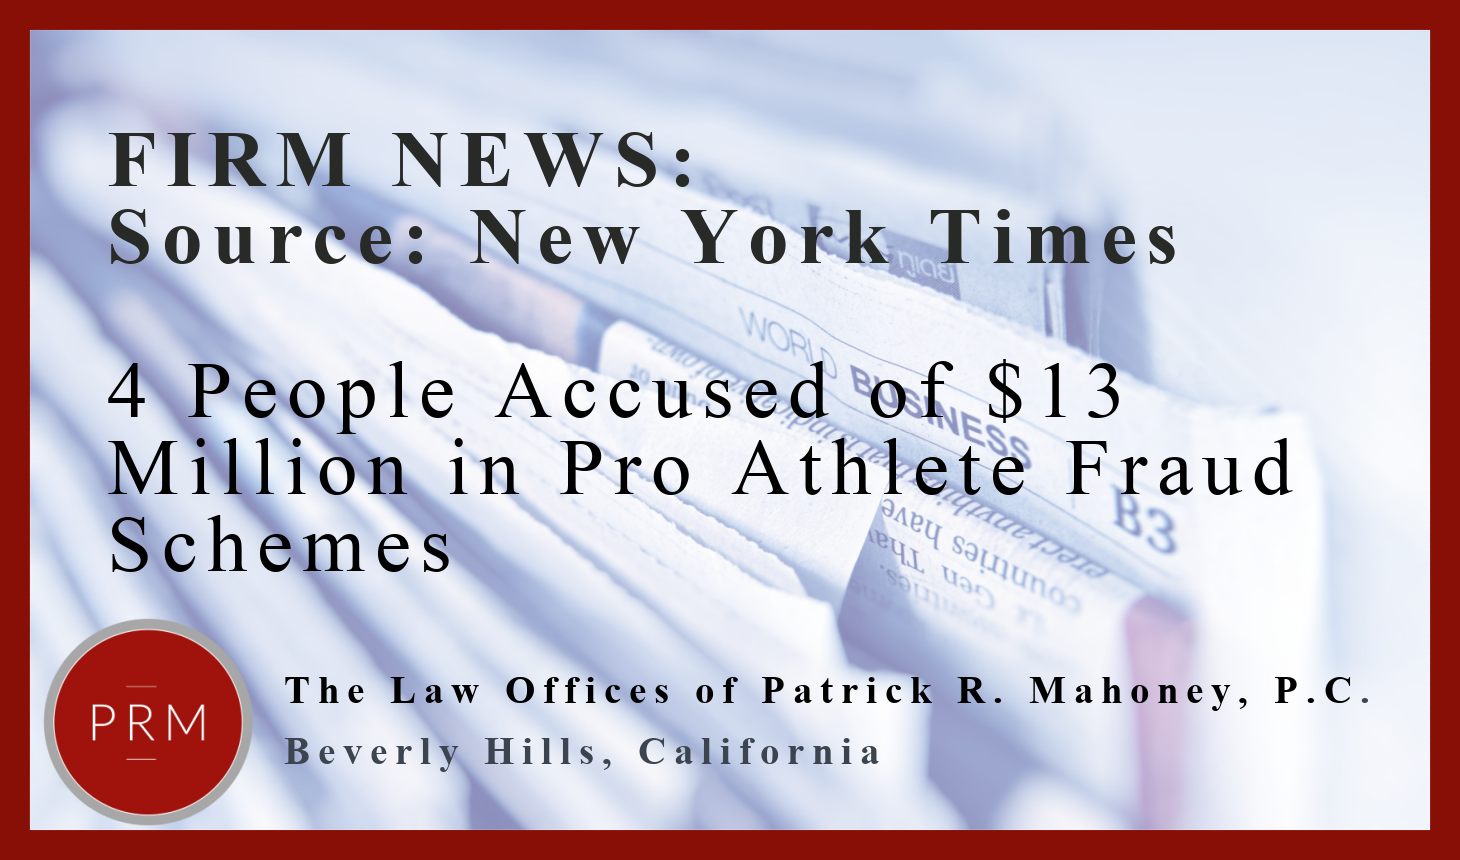 4 People Accused of $13 Million in Pro Athlete Fraud Schemes